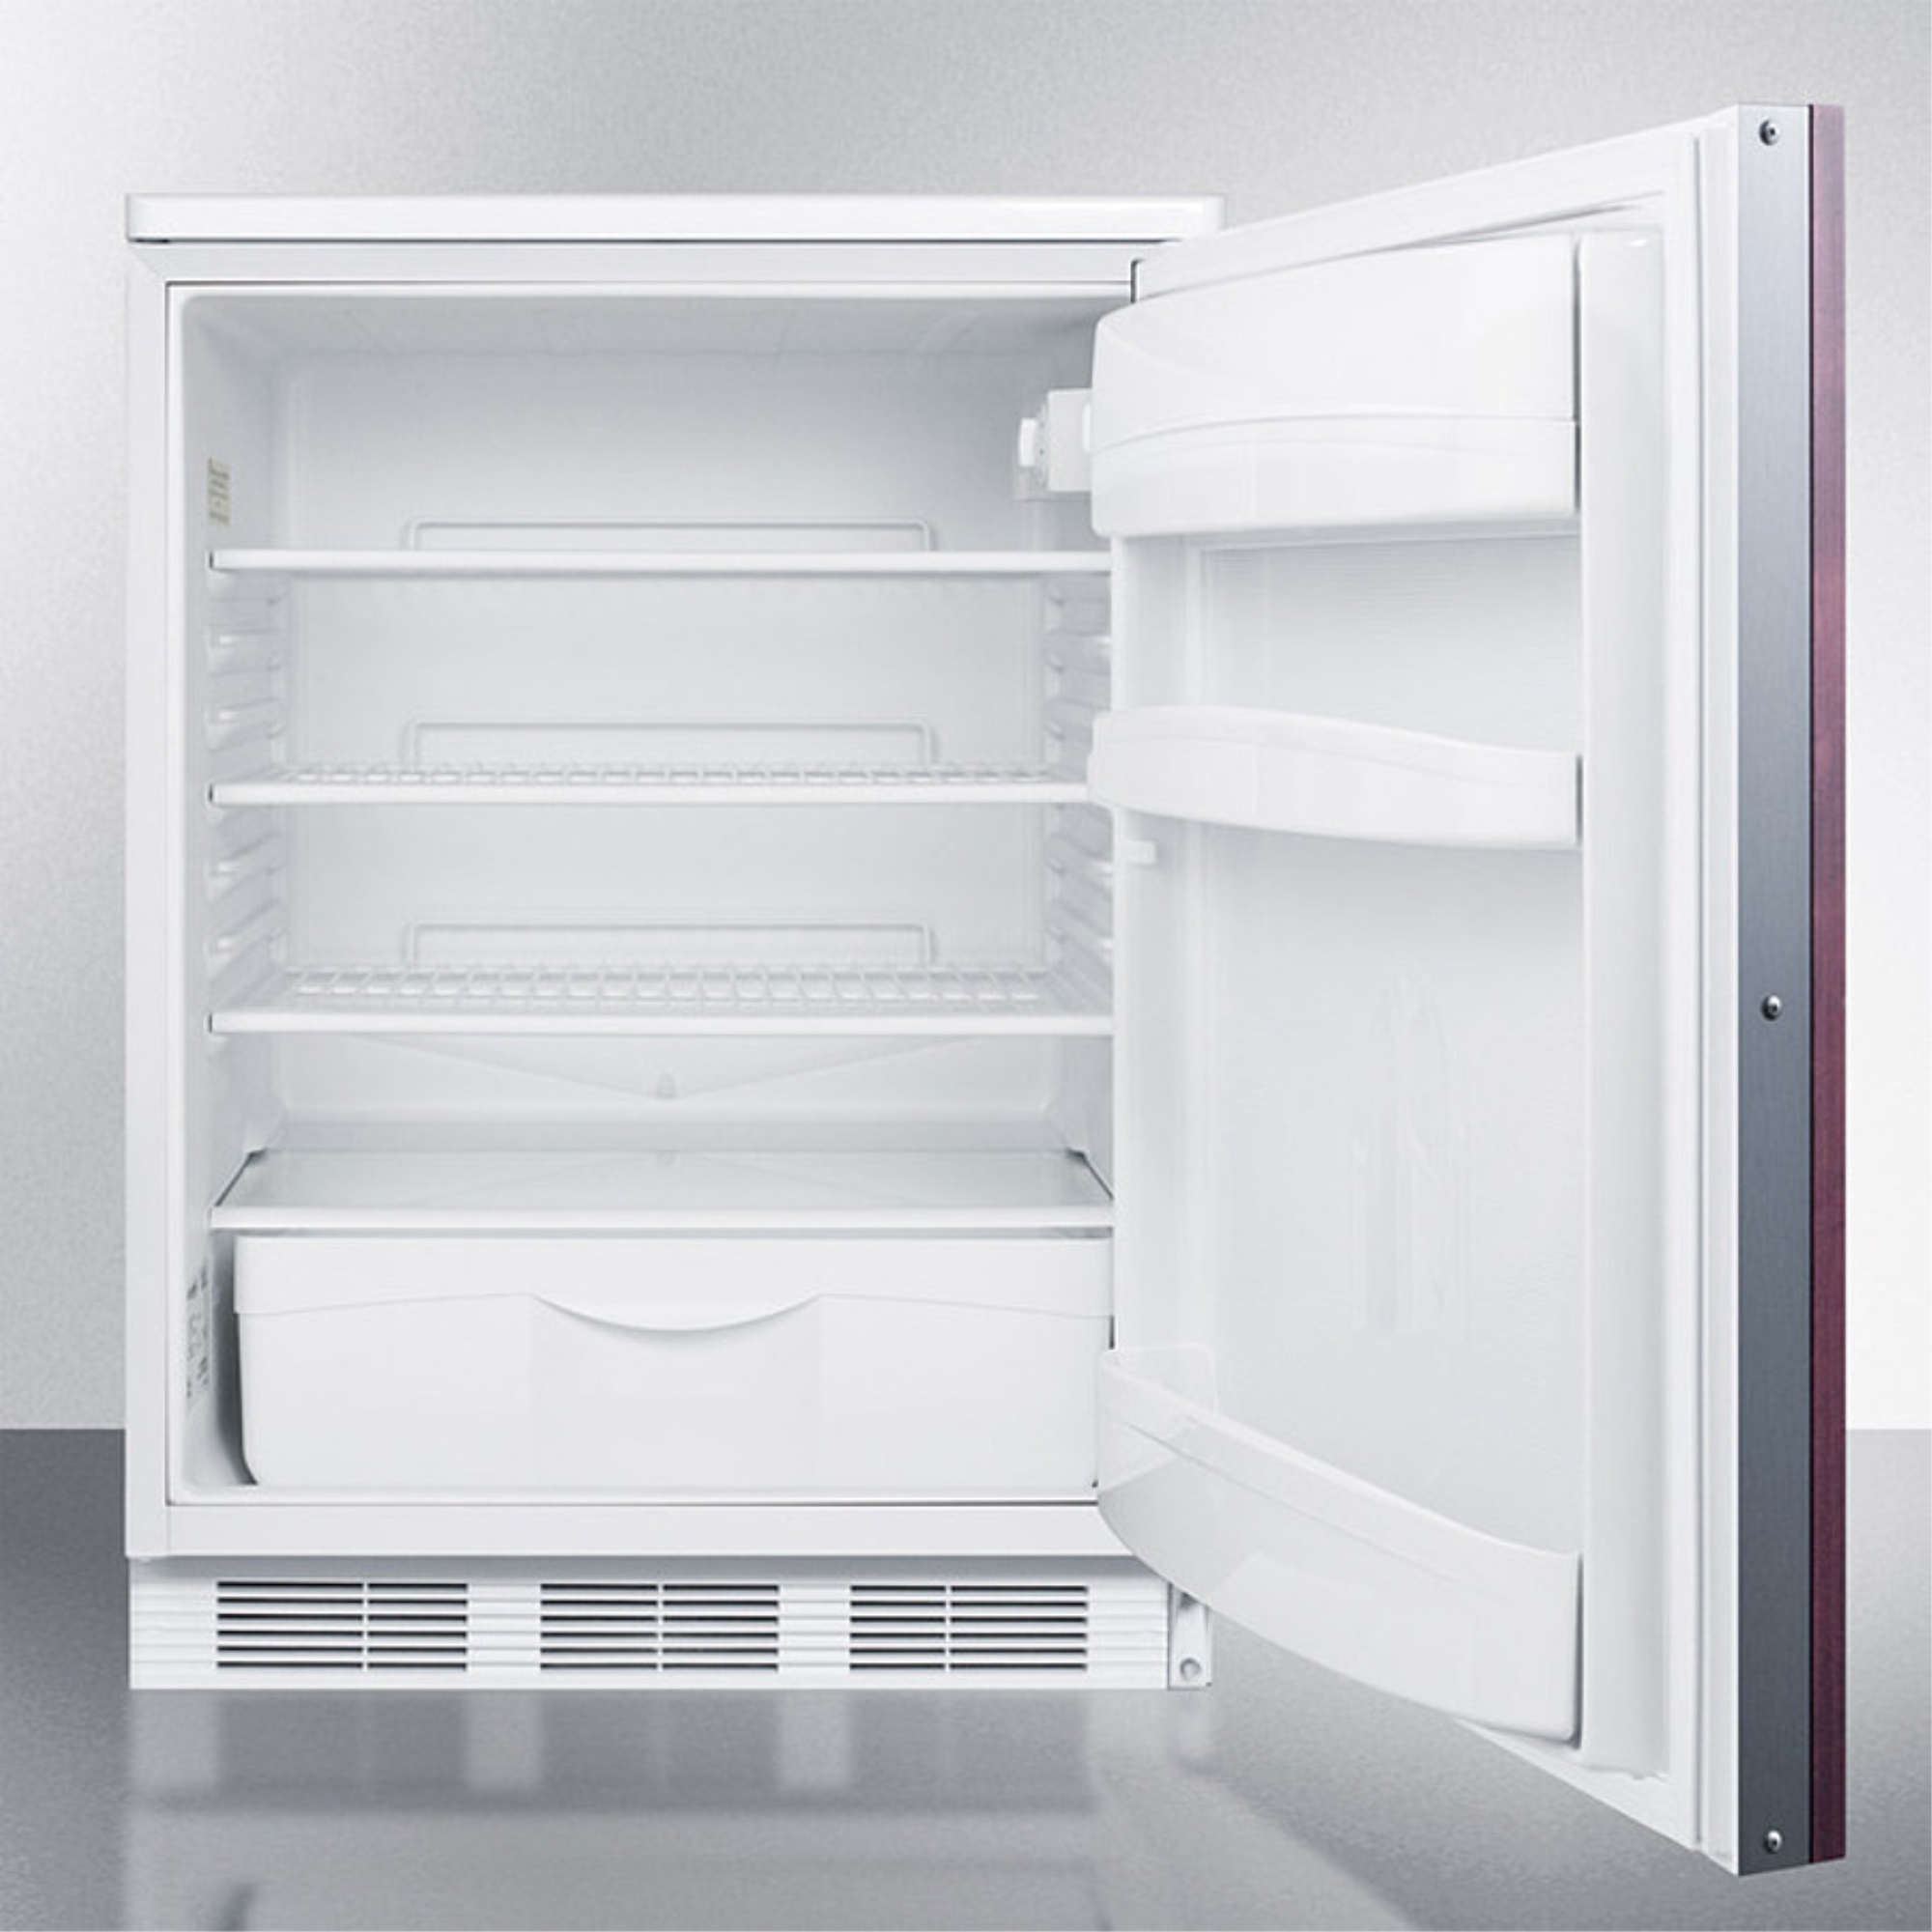 AccuCold Commercially approved built-in undercounter all-refrigerator with auto defrost, deluxe interior, and front lock; capable of ac